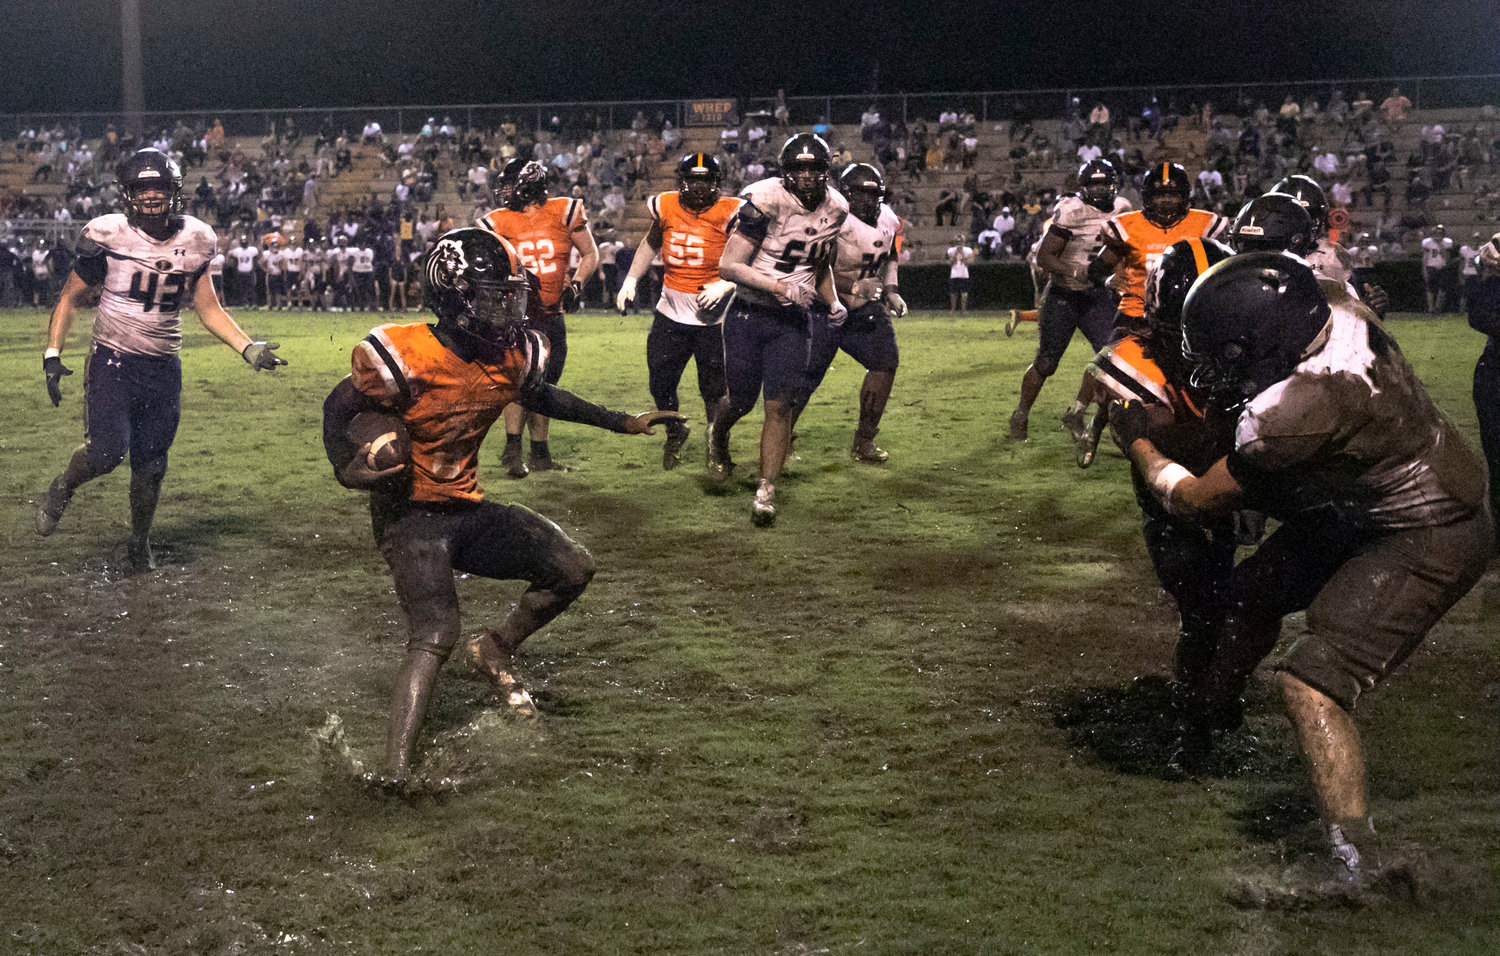 Tiger receiver Damorien Andrews looks for running room while traversing the muddy gridiron on Mitchell Field at Lyle Underwood Stadium in Bay Minette Friday night.